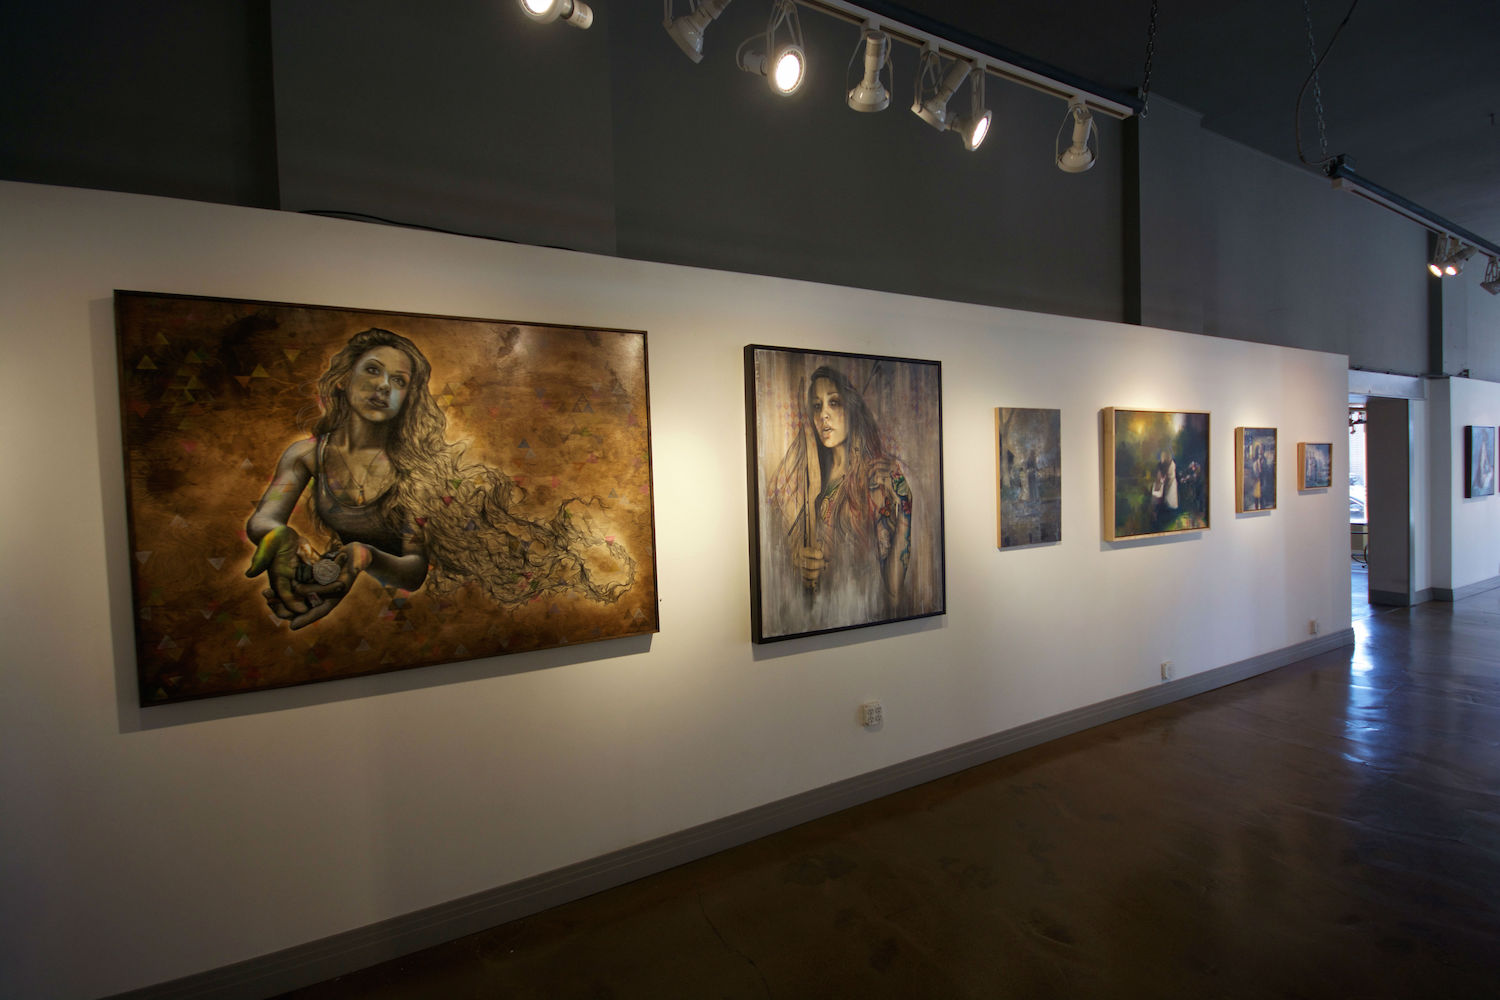 Inside the exhibition, looking at works by Rashelle Stetman. Photo by Abend Gallery